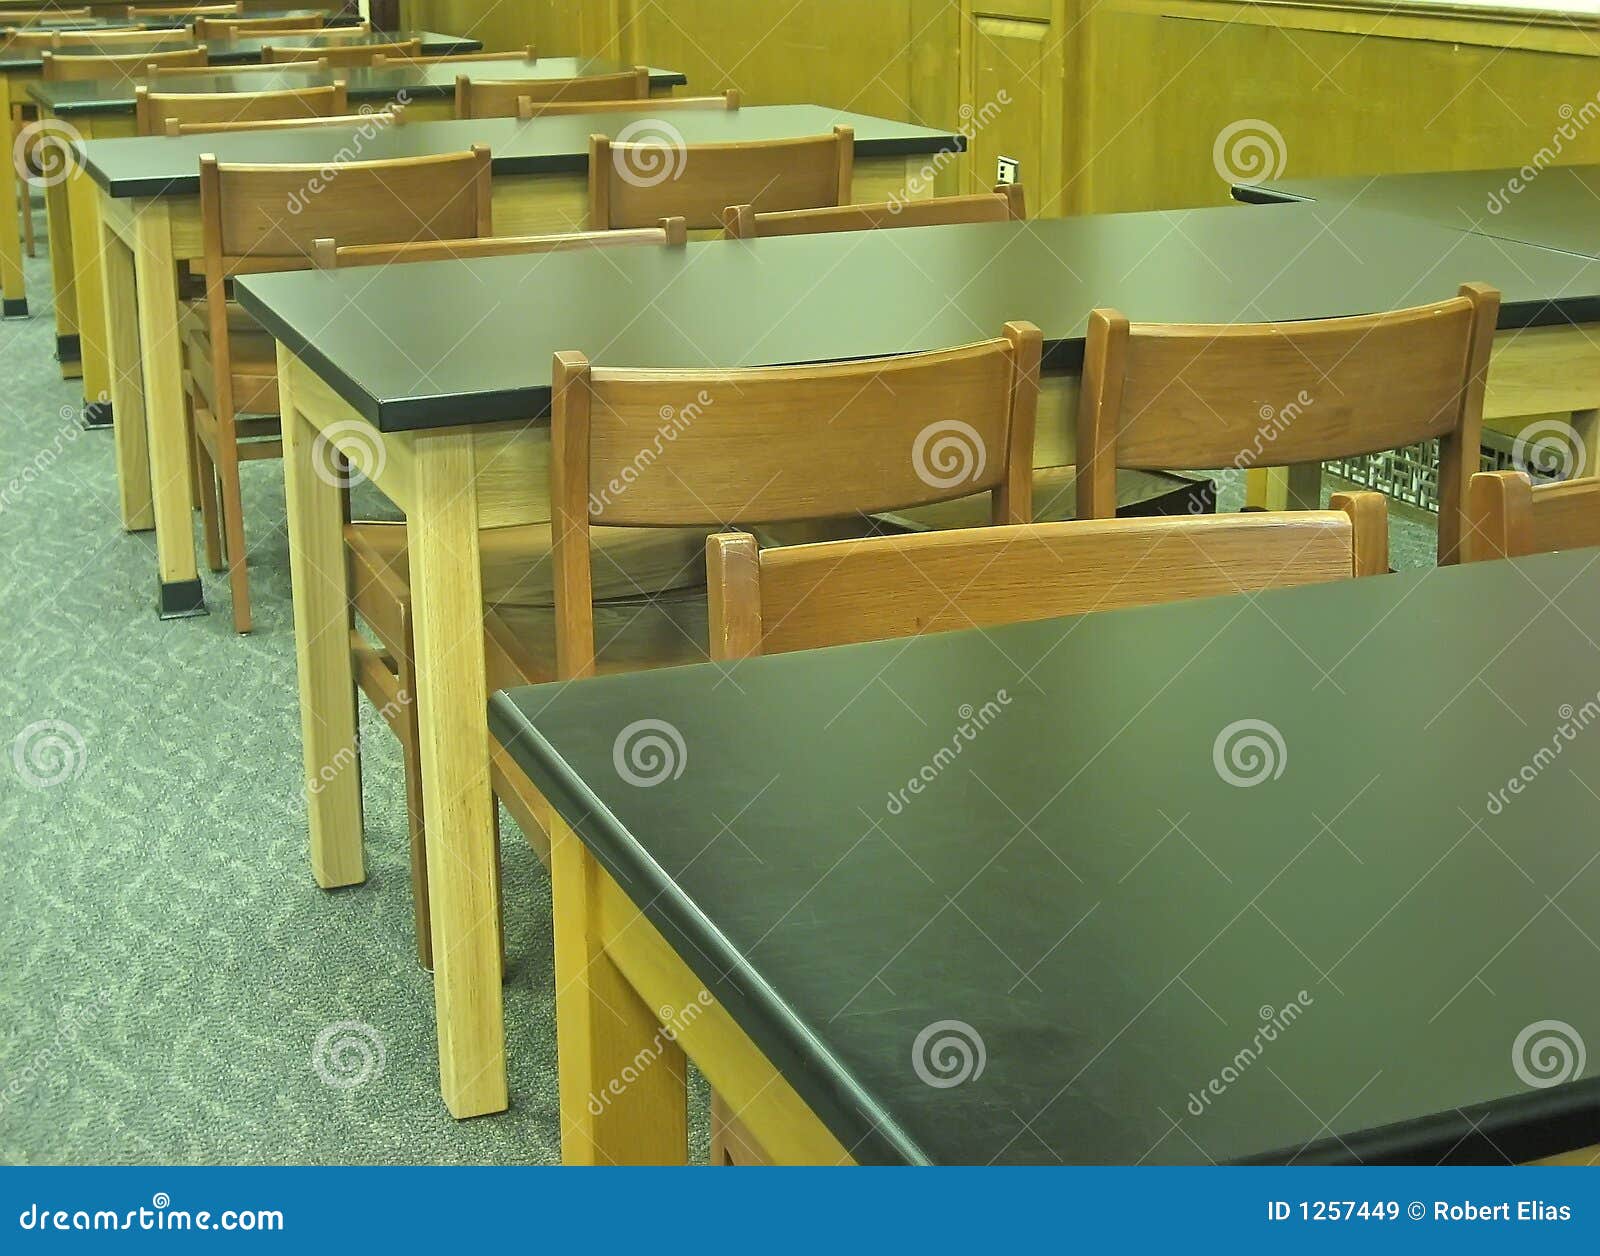 Old Fashioned Desks And Chairs Picture Image 1257449